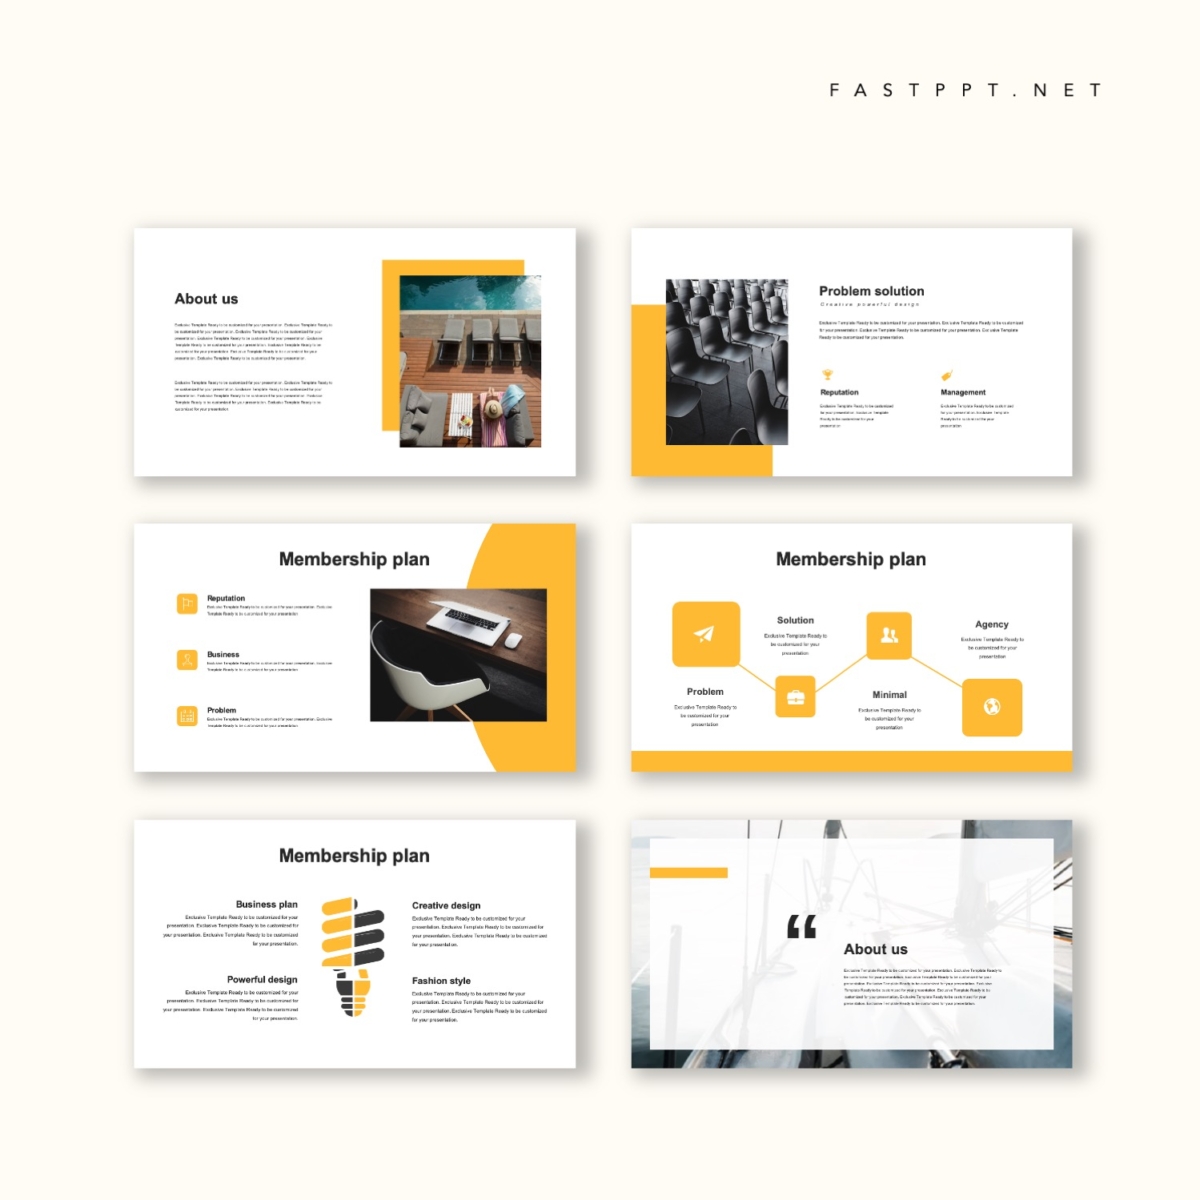 Clean Business & Introduction PowerPoint Template. Corporate PowerPoint Template. PowerPoint Templates Professional